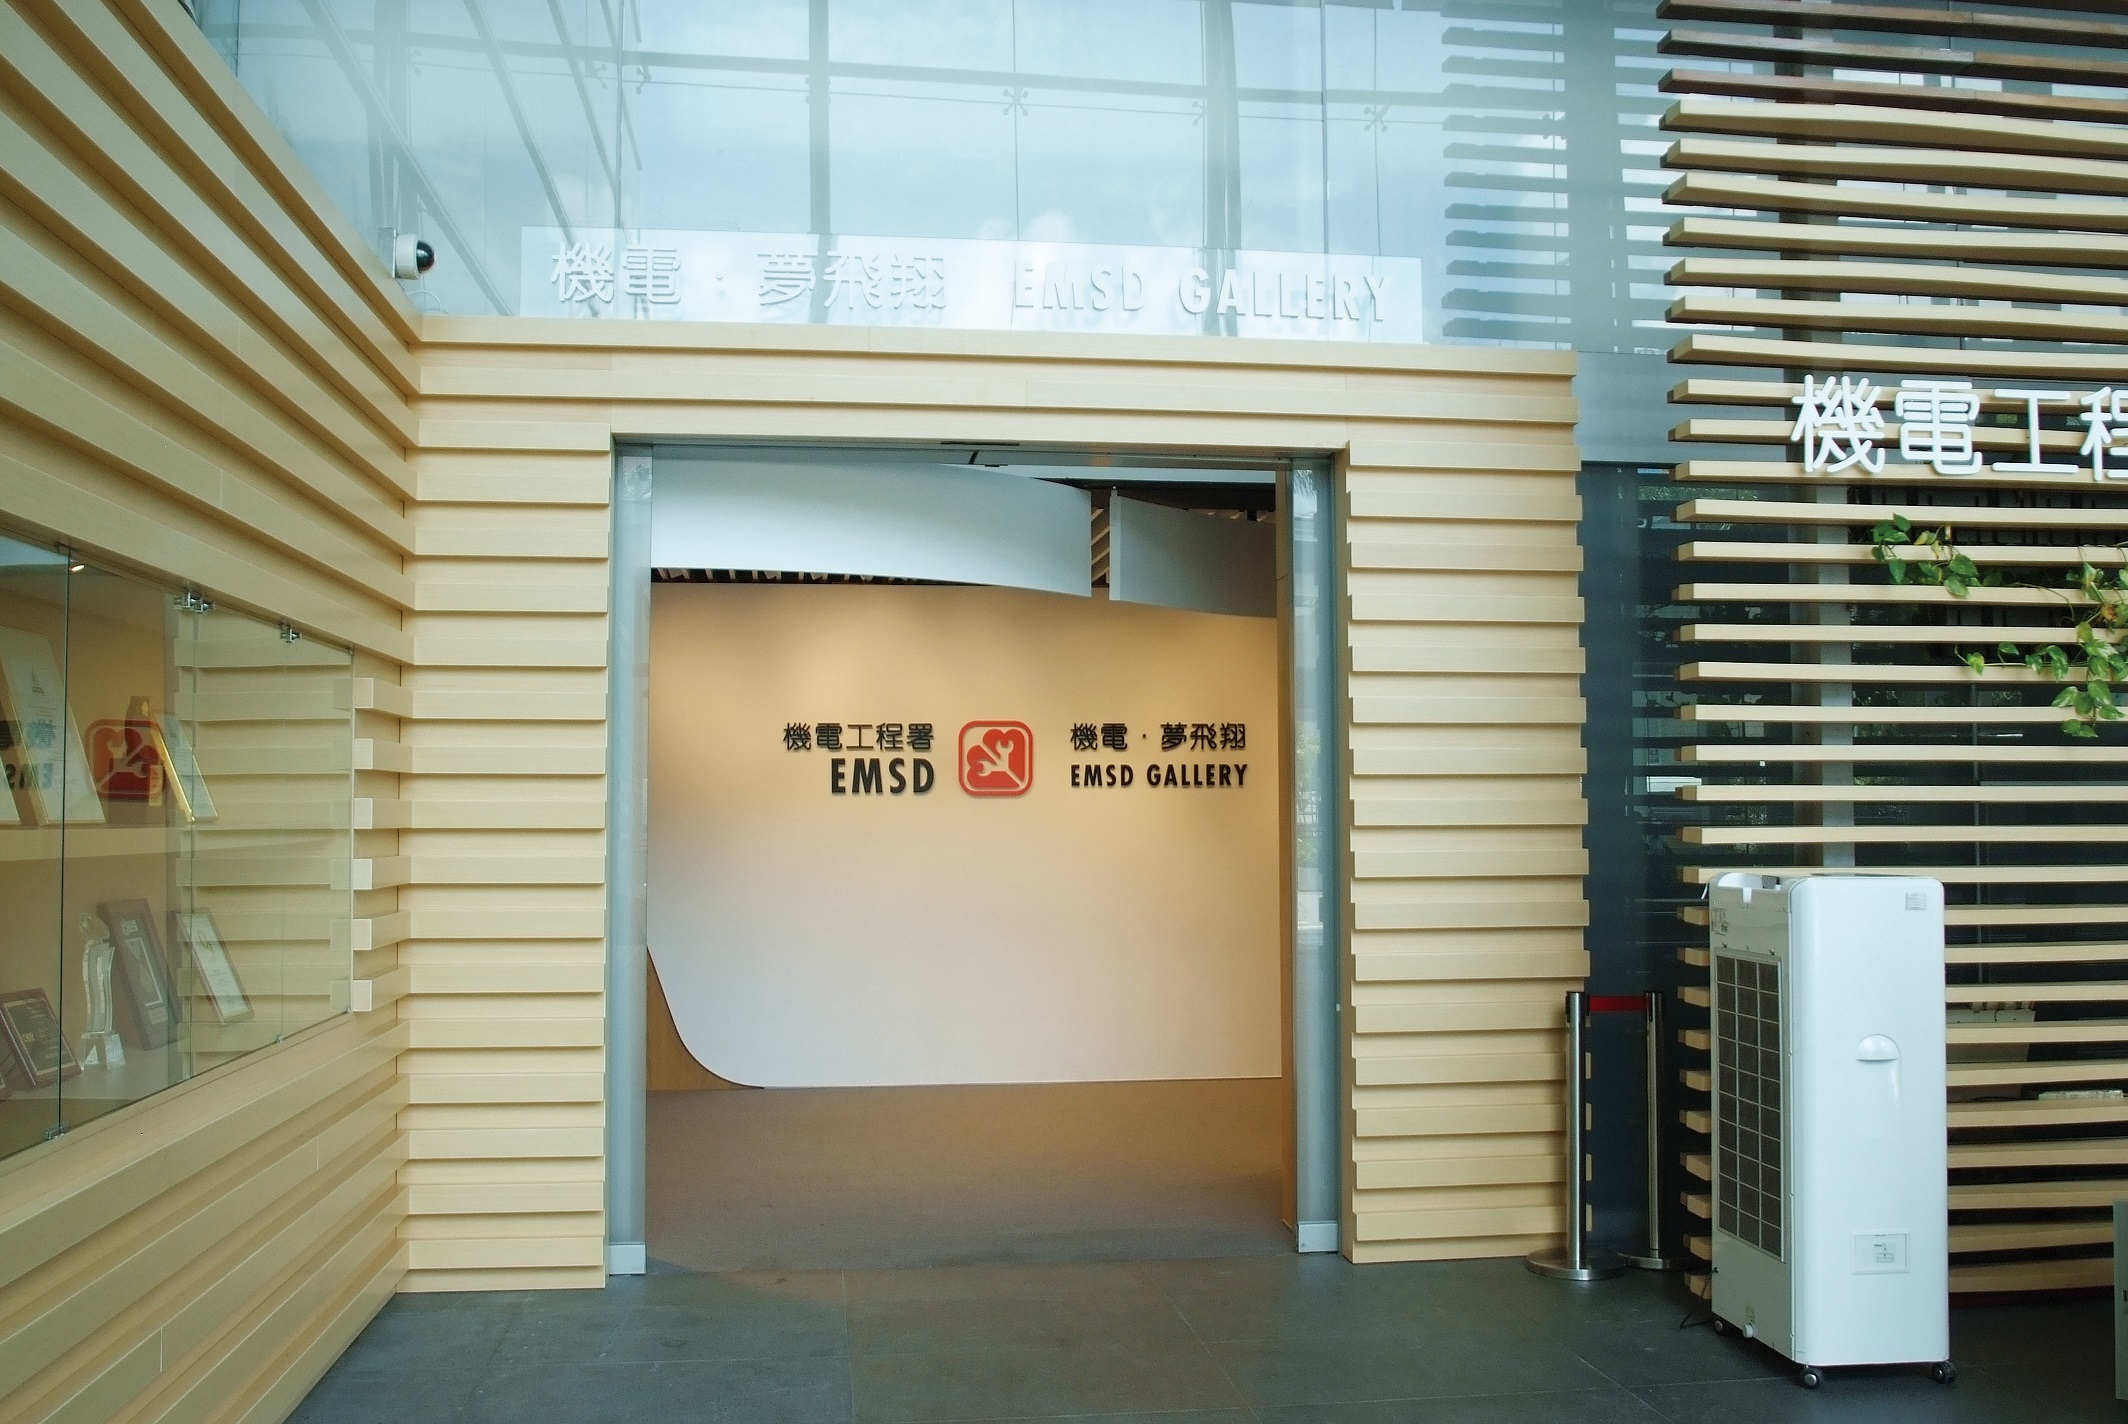 Entrance to EMSD Gallery